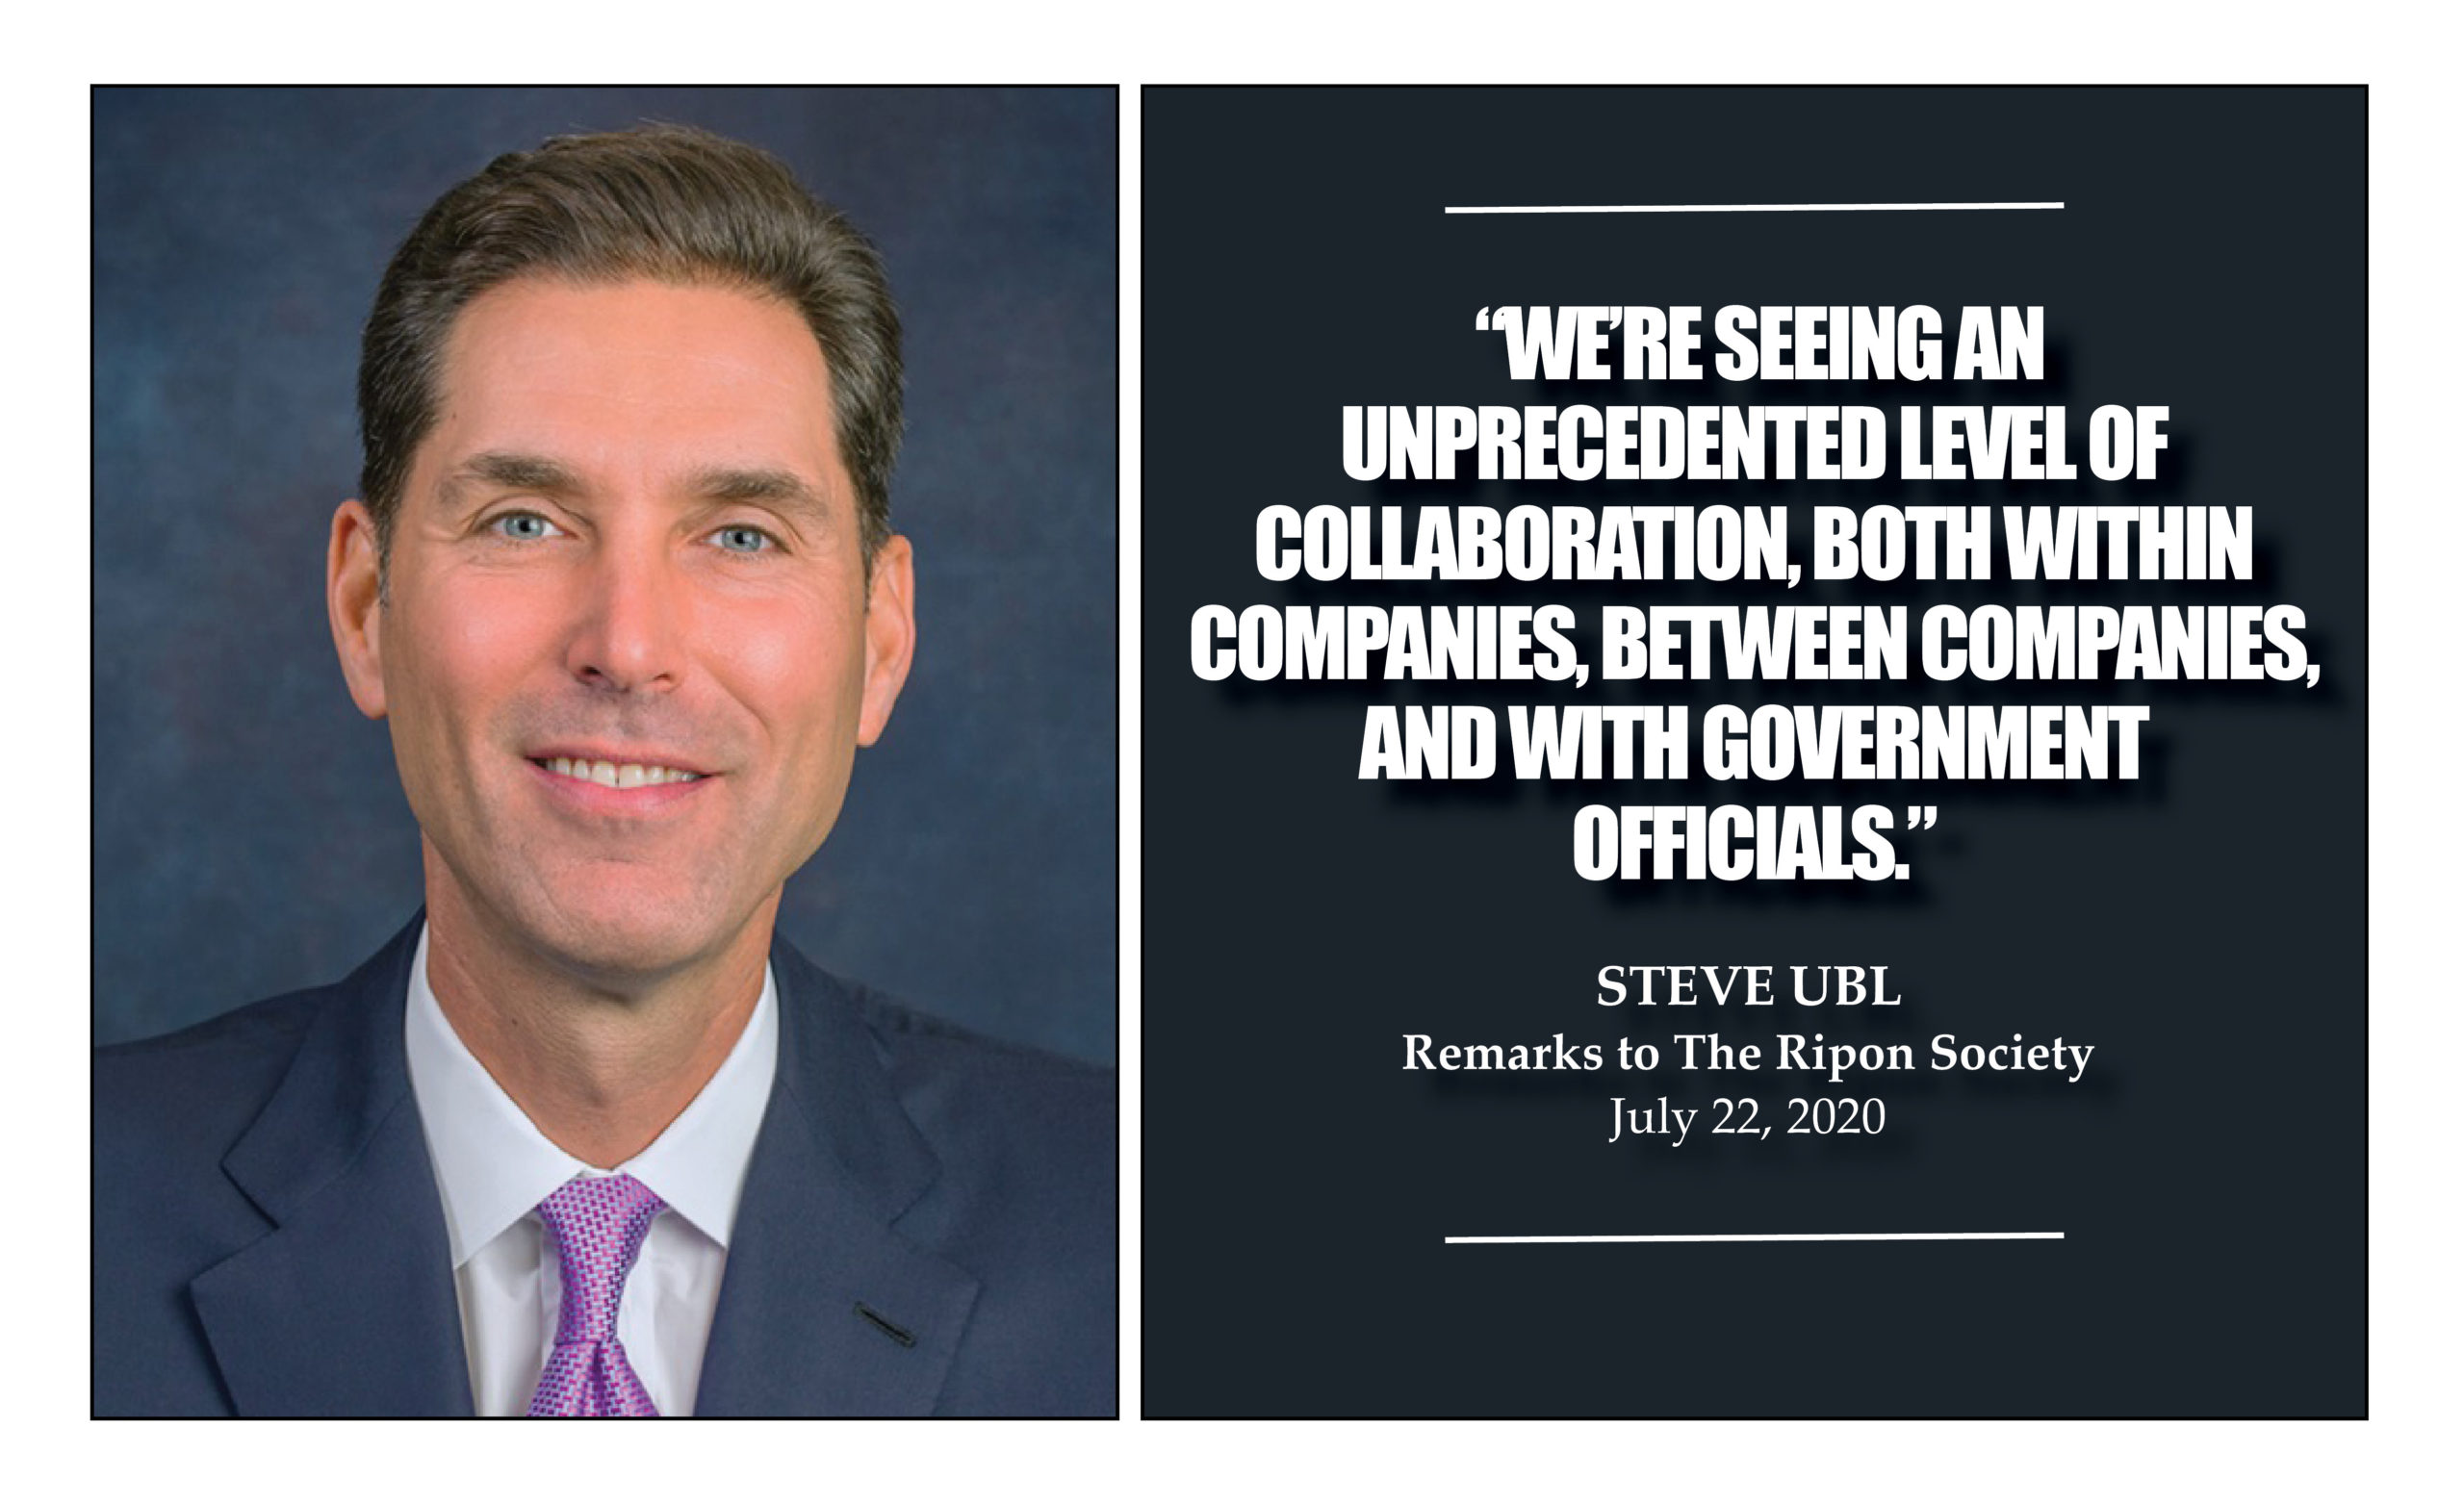 PhRMA Head Steve Ubl Highlights Industry Response to Global Pandemic